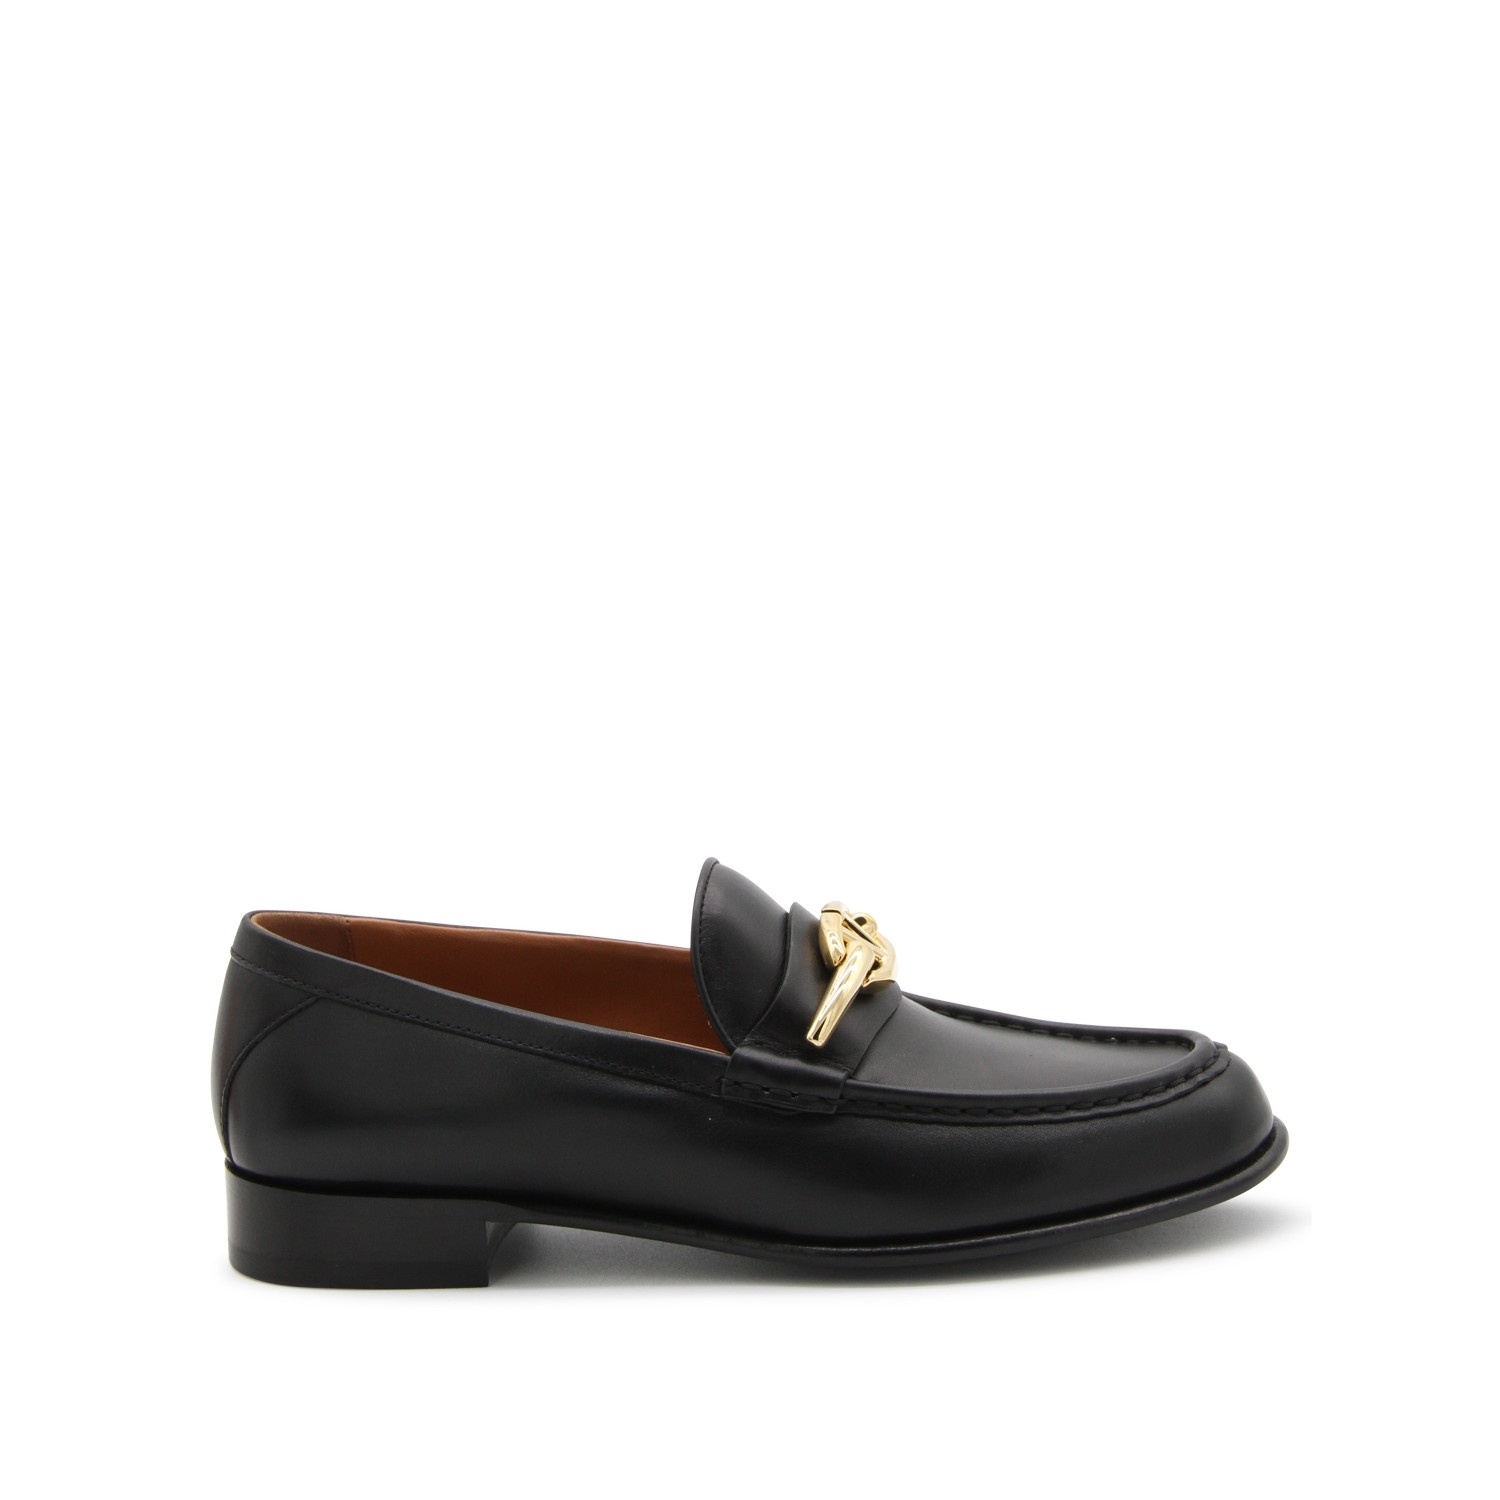 BLACK LEATHER LOAFERS - 1